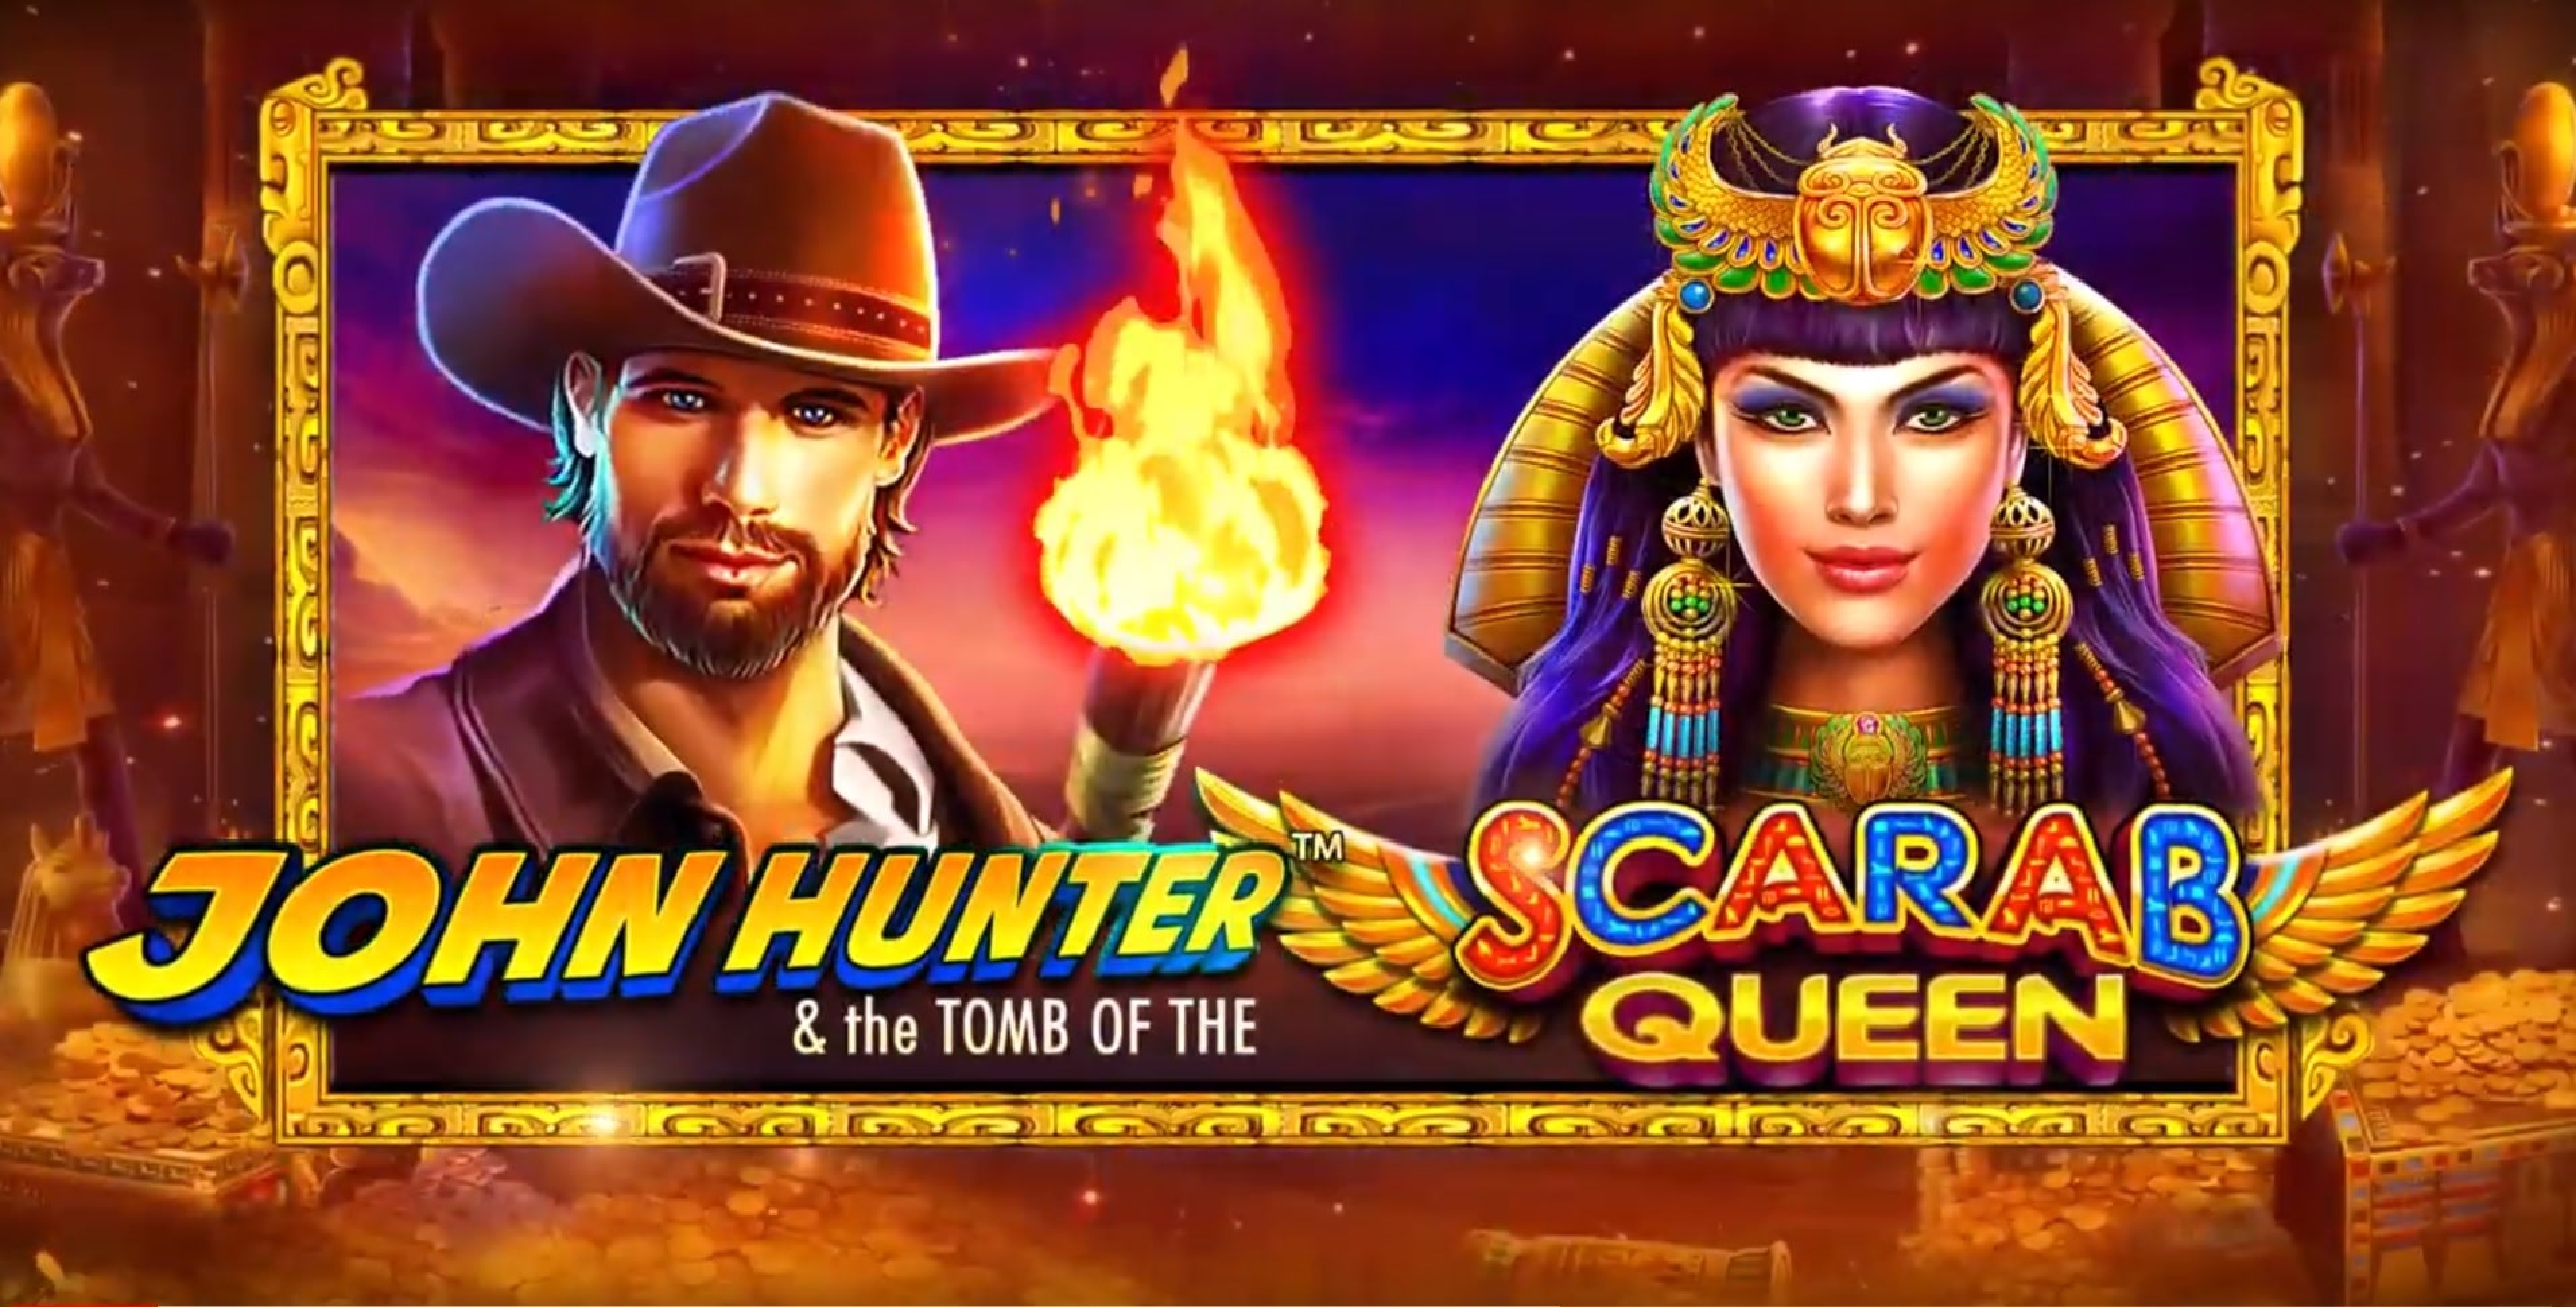 The John Hunter Tomb of the Scarab Queen Online Slot Demo Game by Pragmatic Play